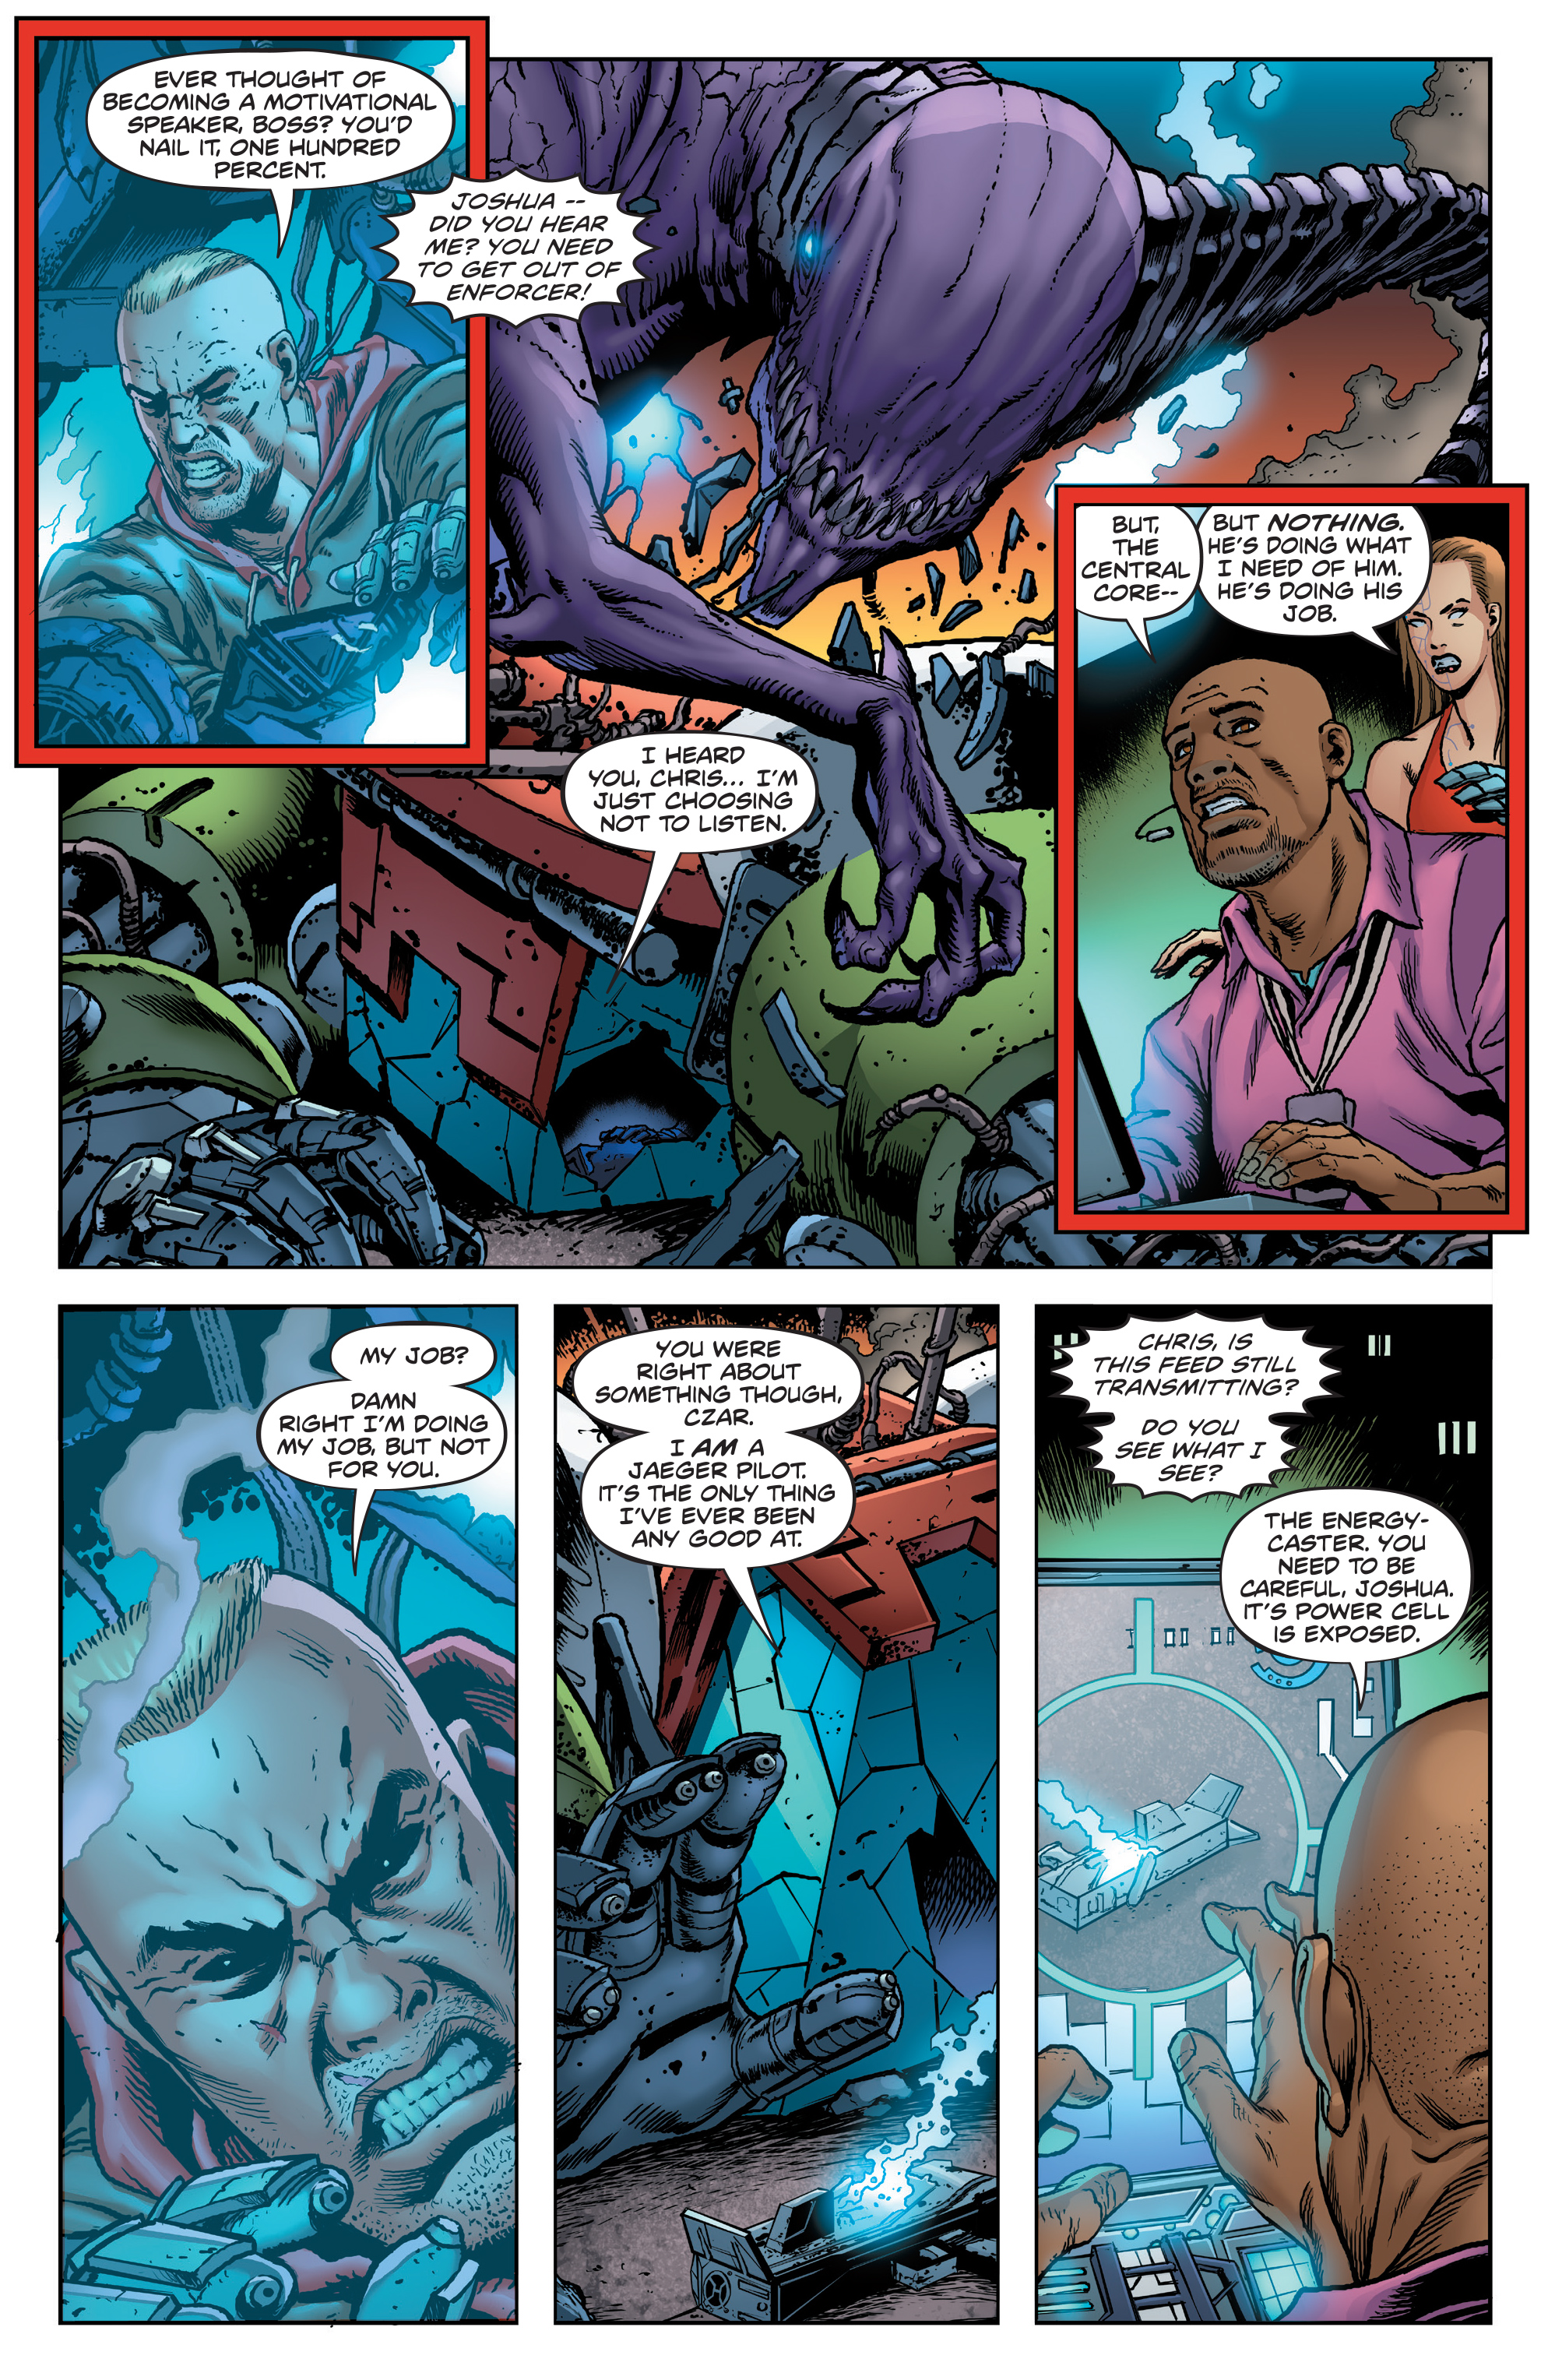 Pacific Rim Aftermath (2018): Chapter 6 - Page 4